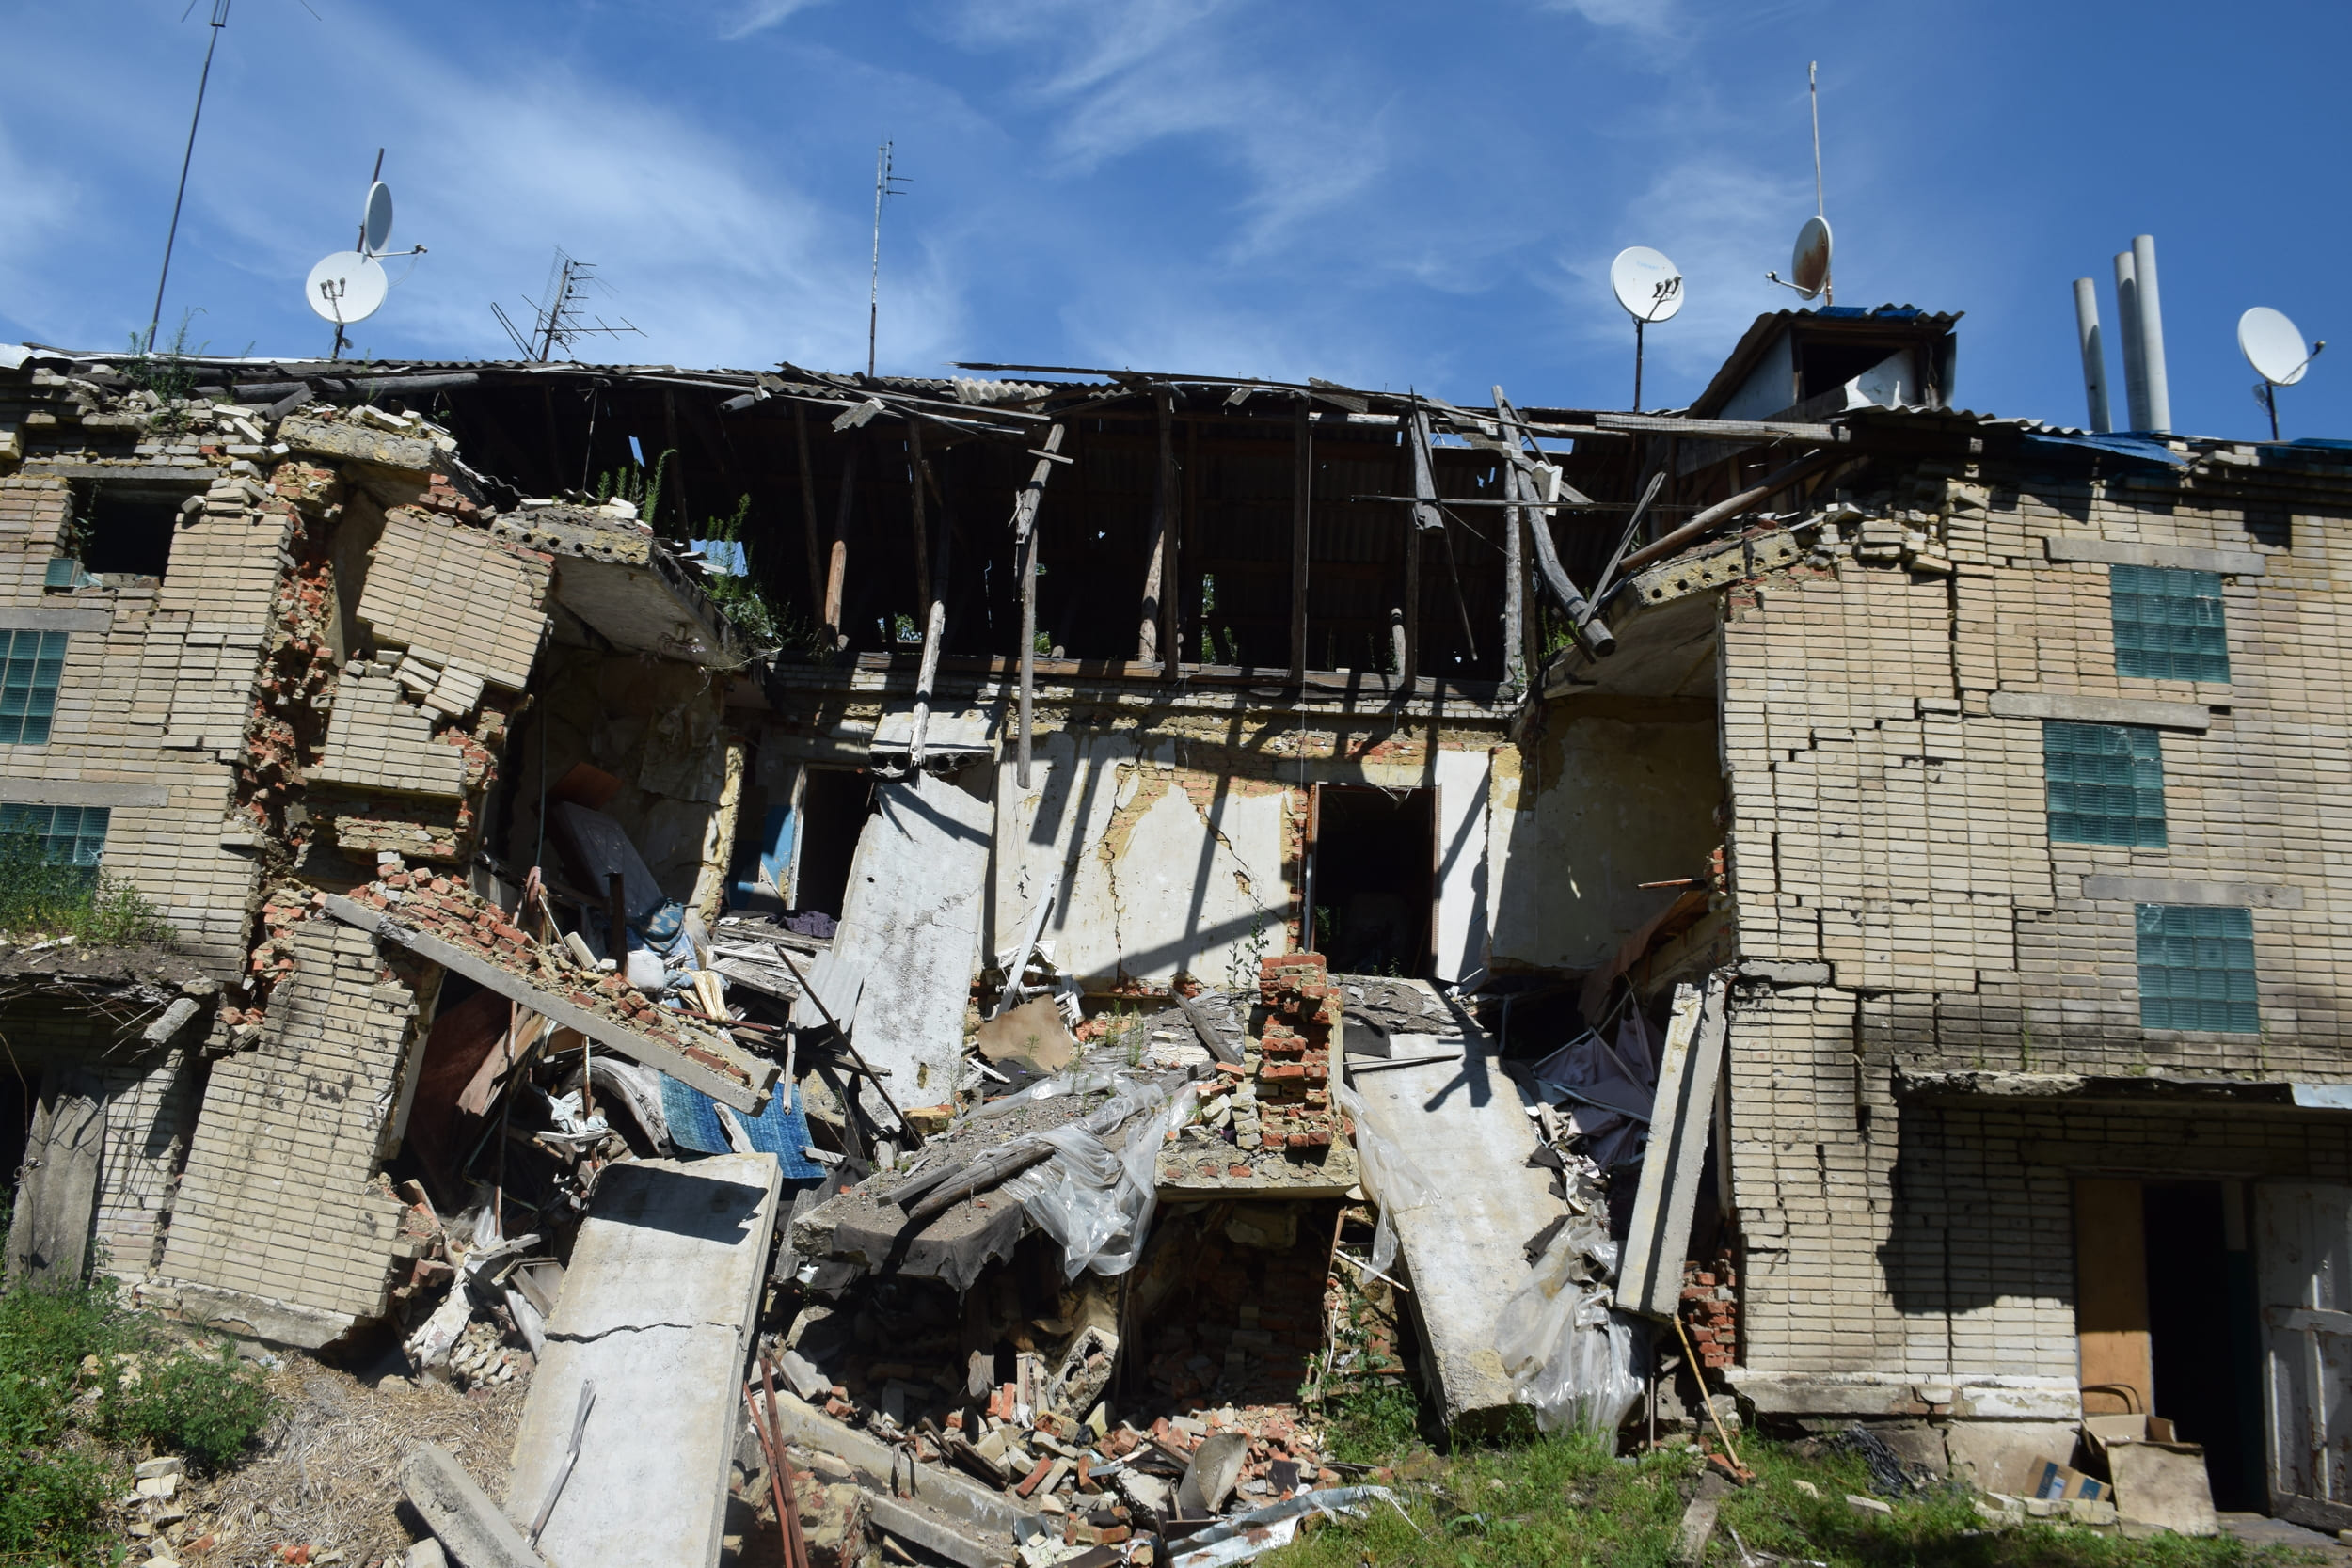 A residential building destroyed by Russian S-300 missiles in Odnorobivka, Bohodukhiv district / Photo: Denys Glushko, Gwara Media